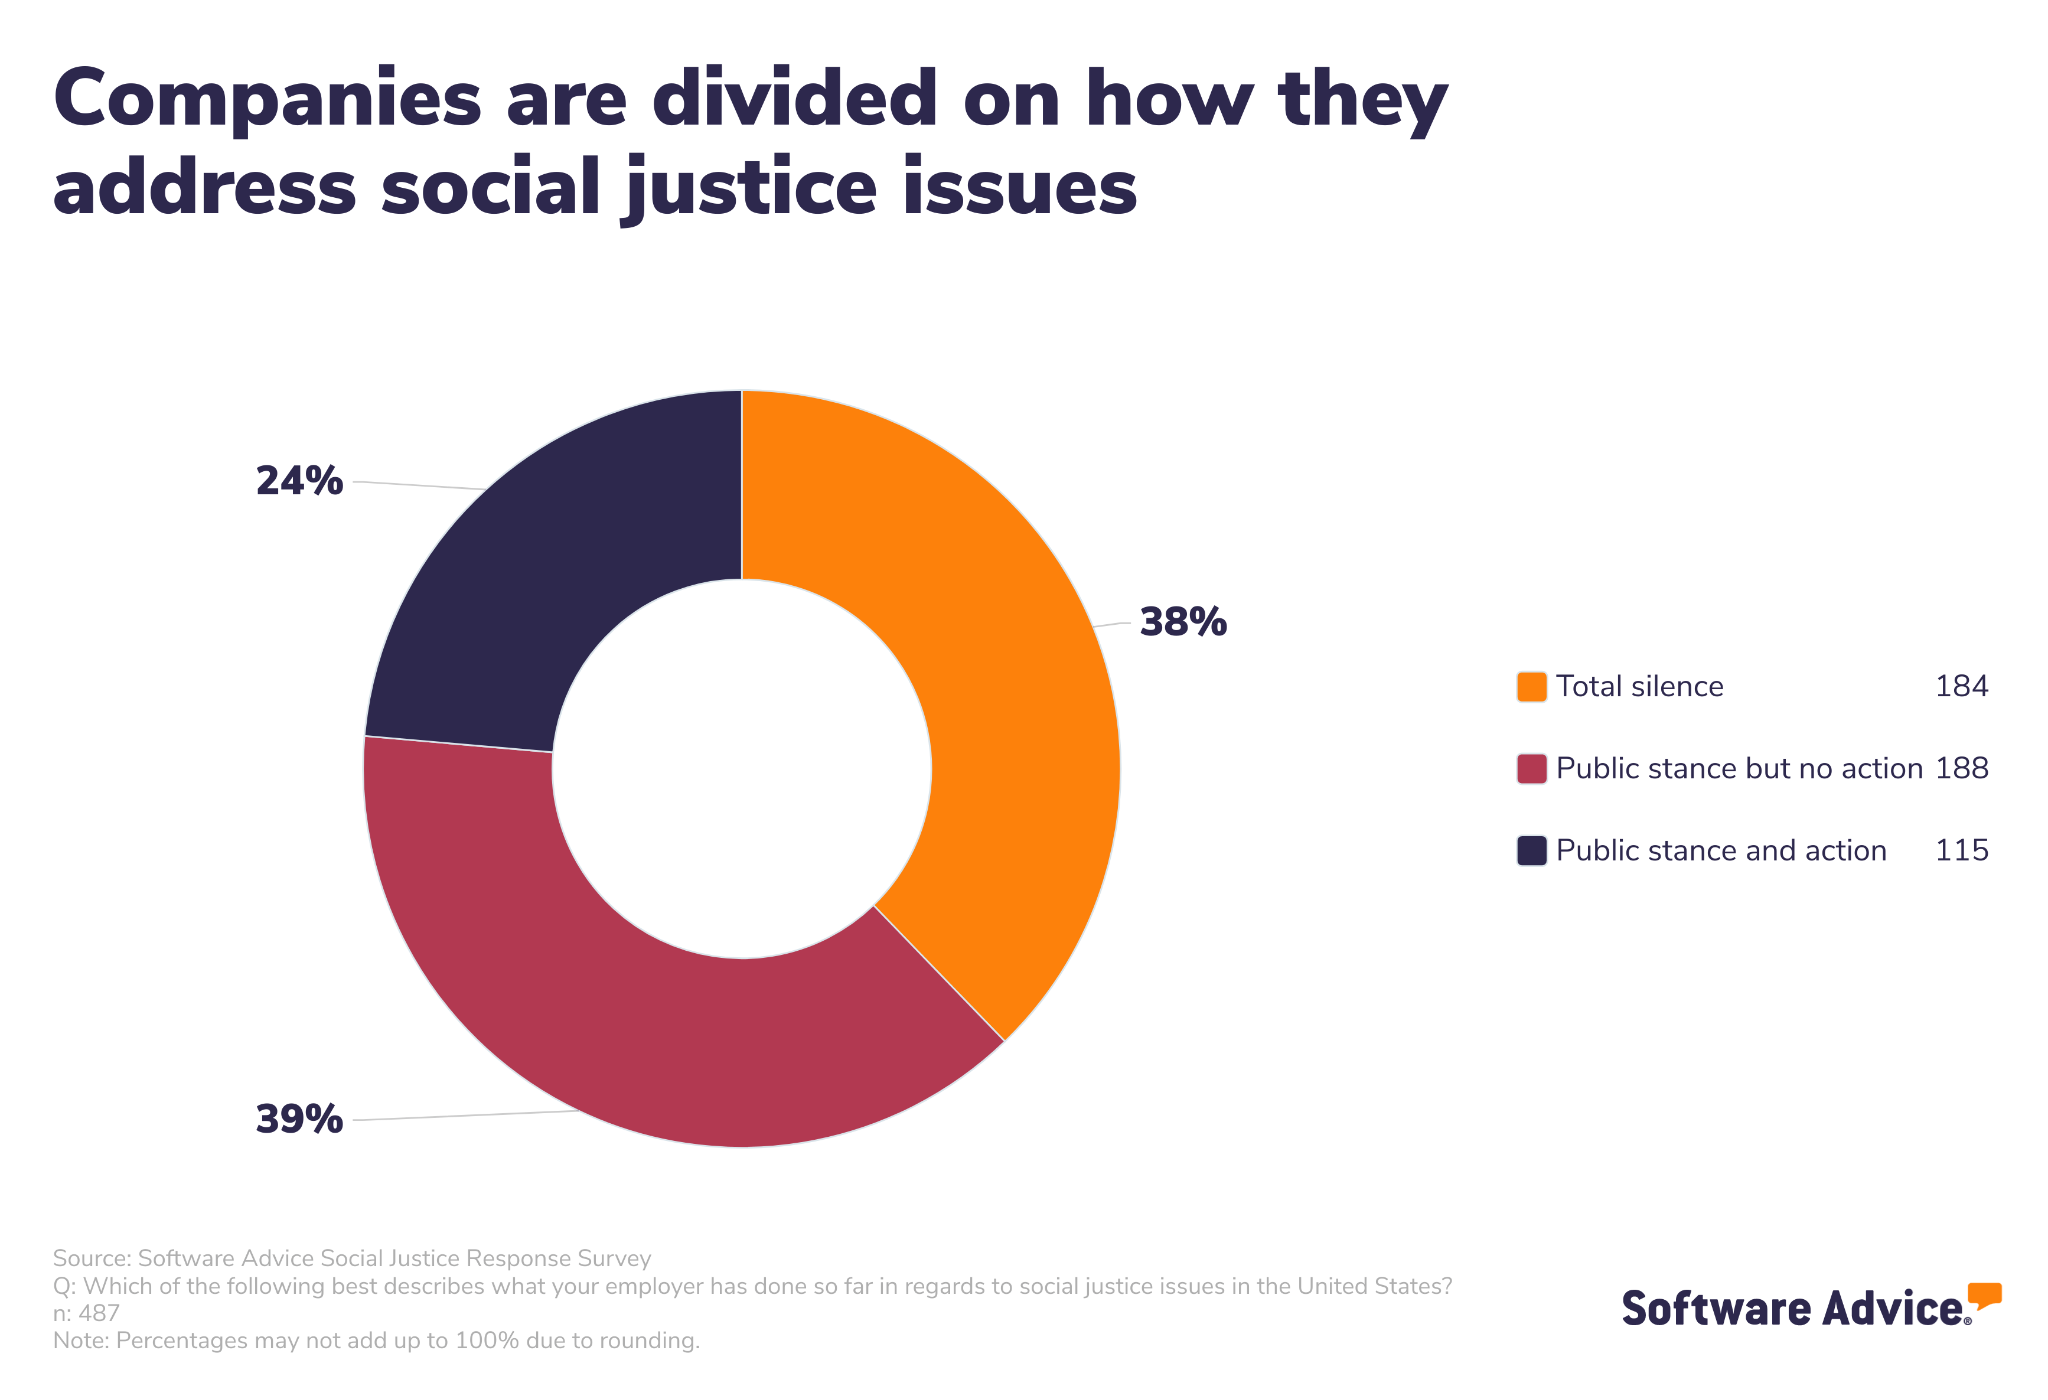 Companies are divided on how they address social justice issues